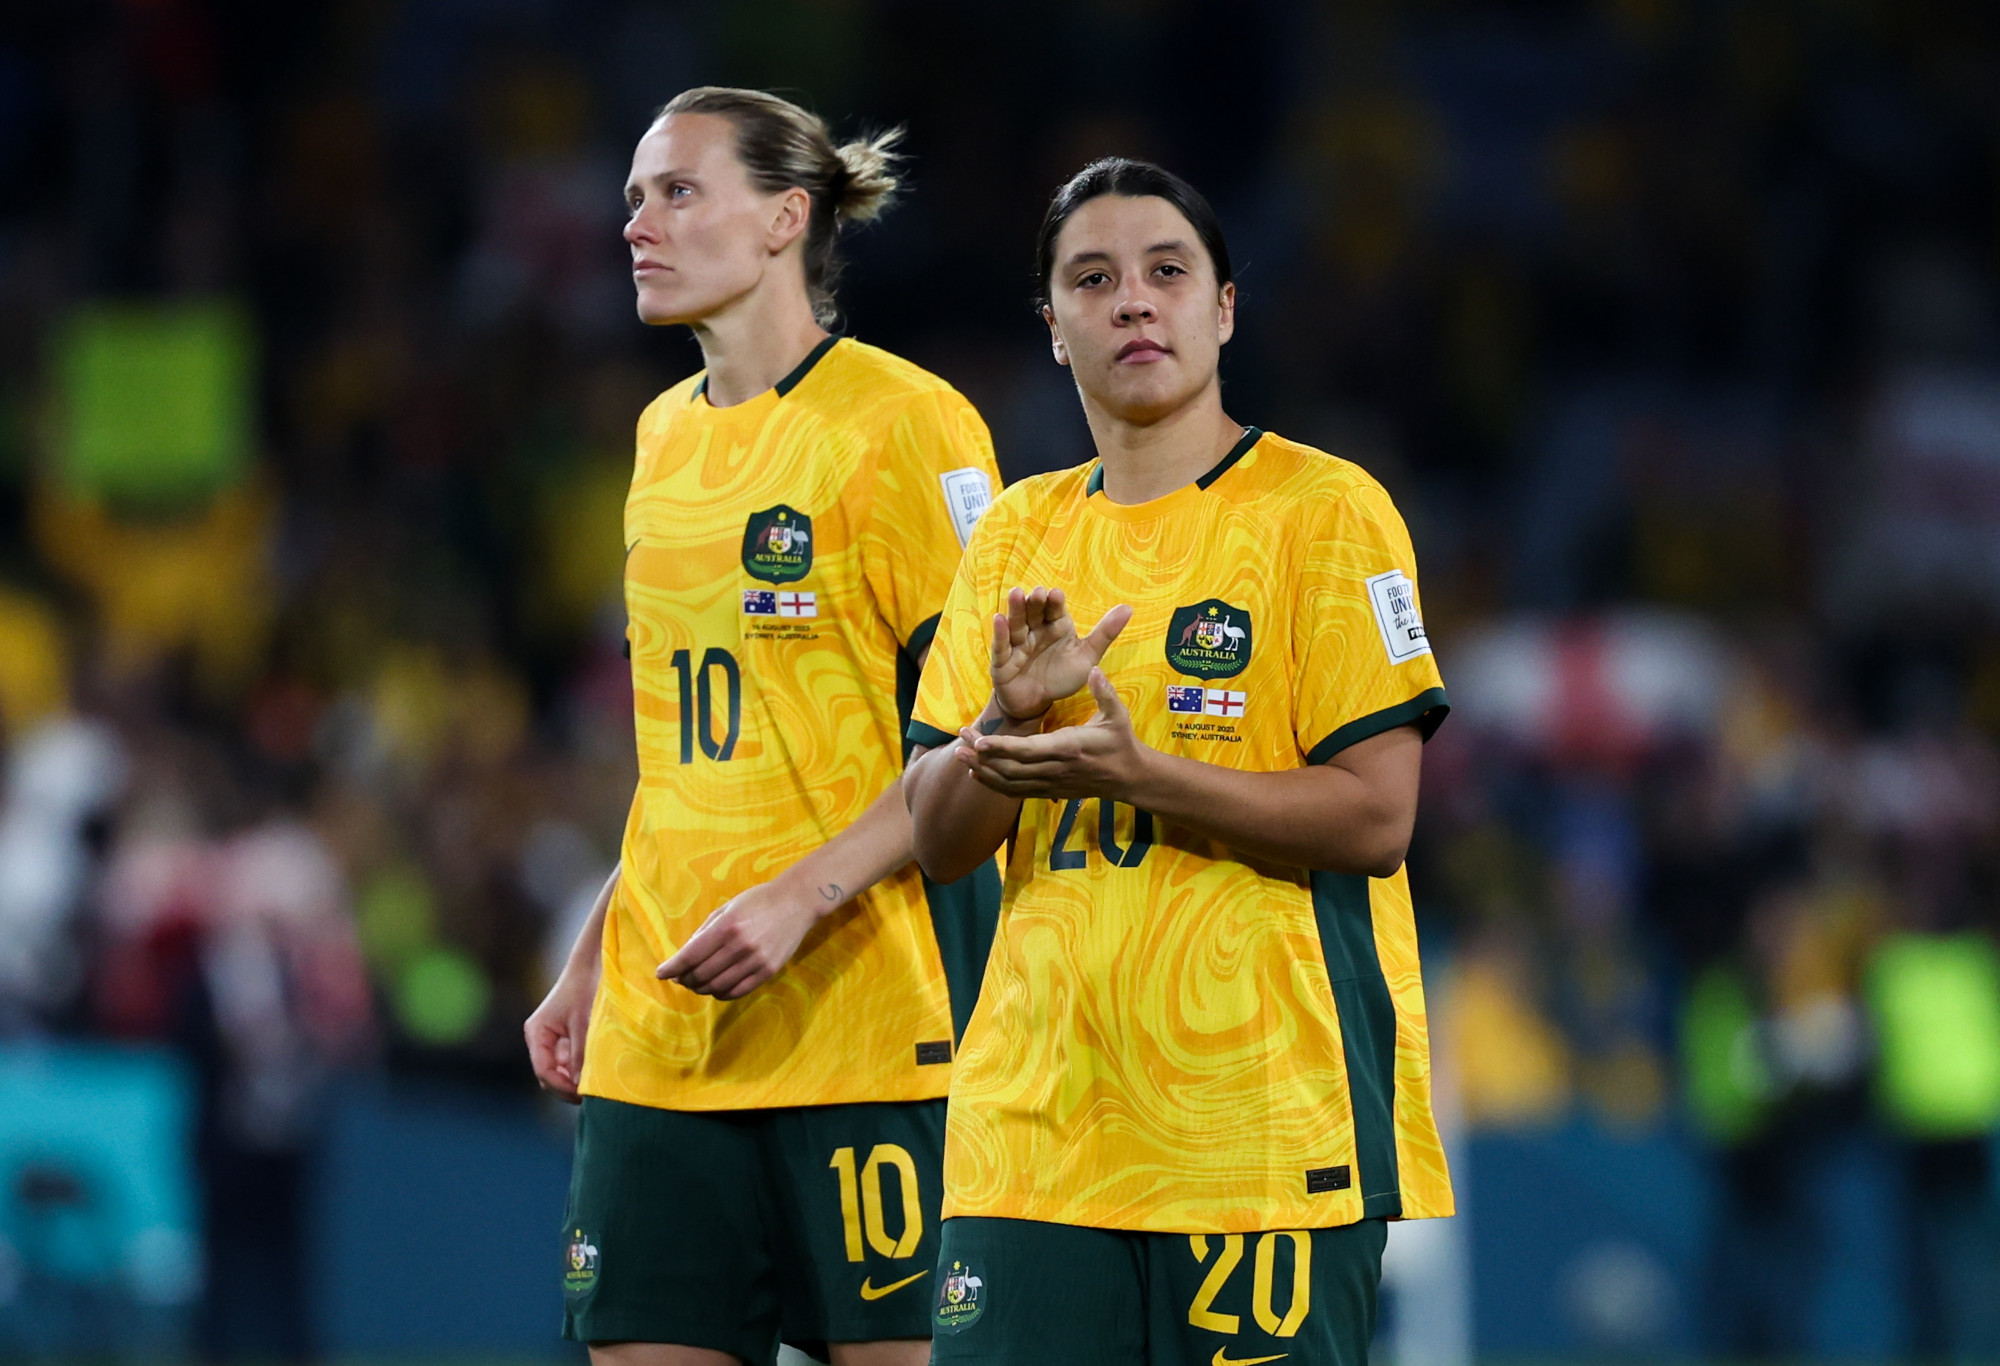 Sam Kerr thanks the fans after Australia's World Cup semi-final loss.